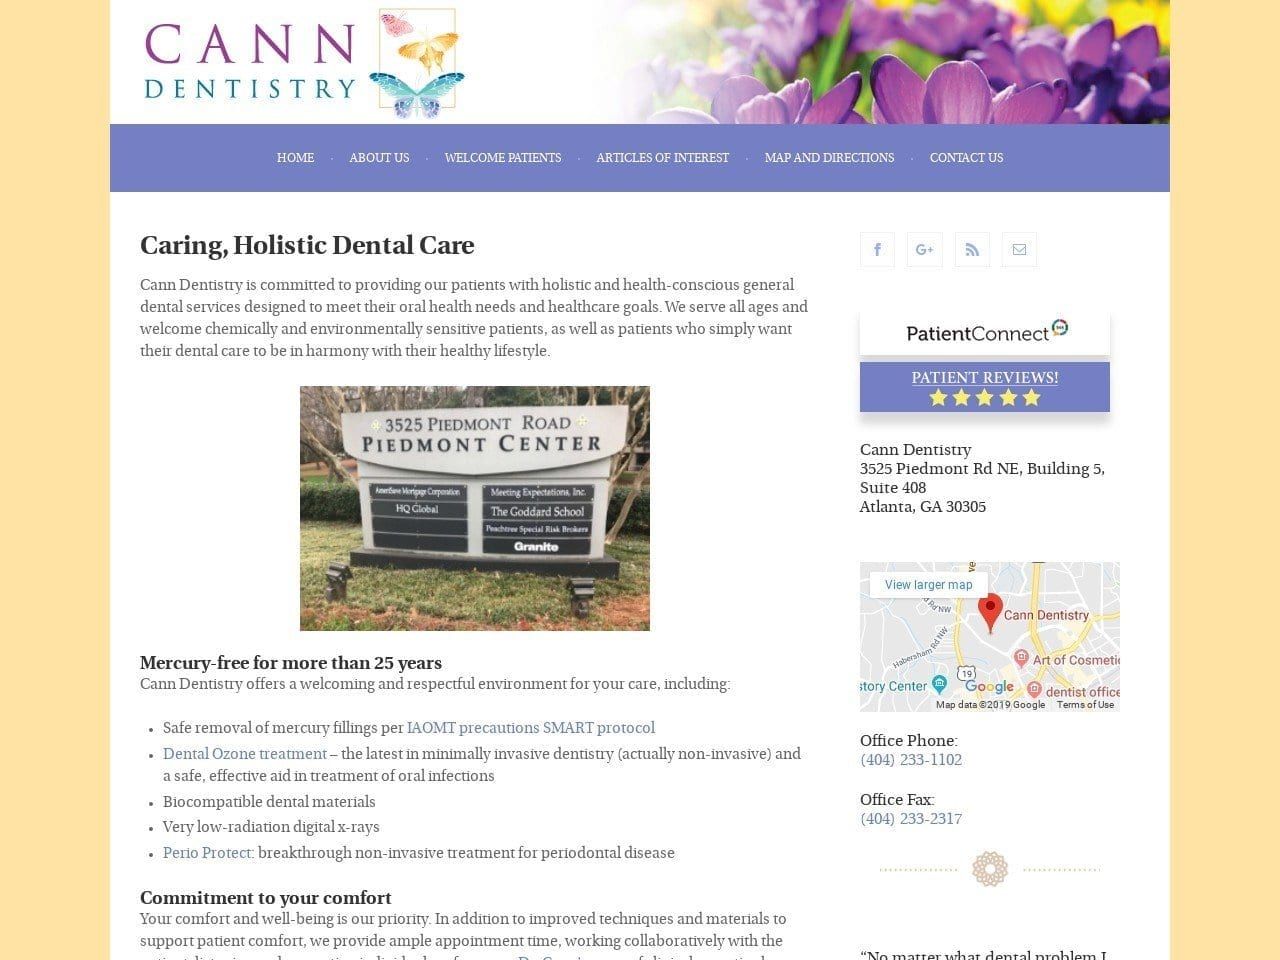 Cann Dentistry Website Screenshot from canndentistry.com